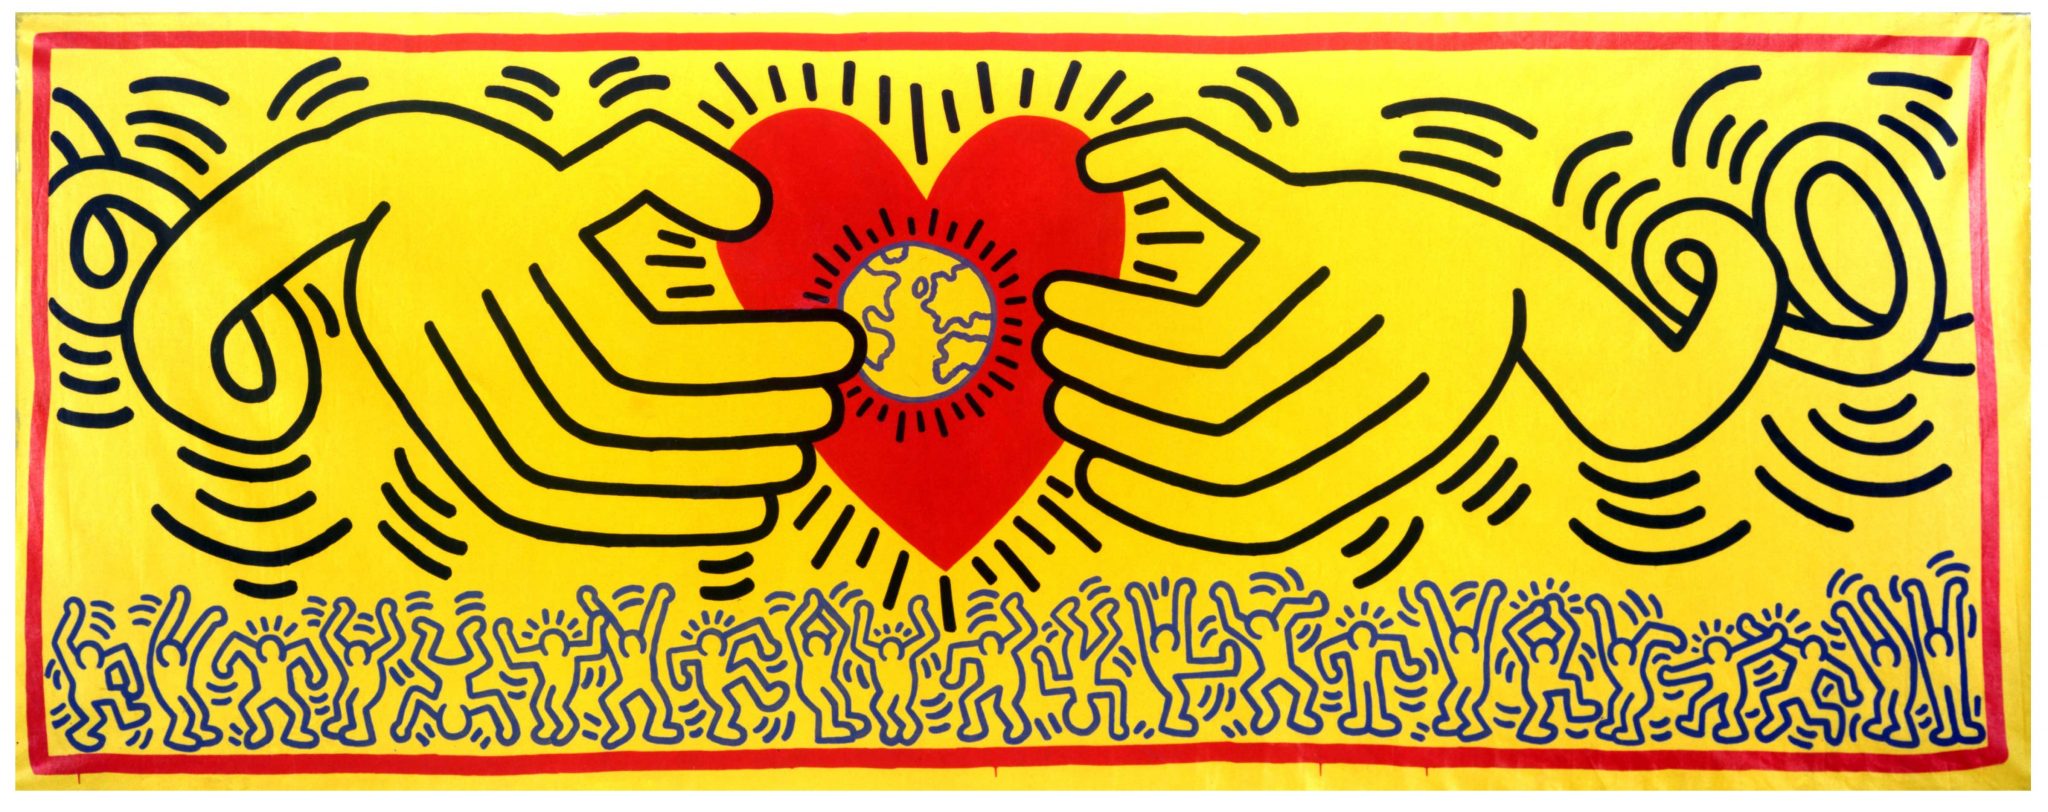 Keith Haring, Untitled, 1983. Courtesy Lia Rumma Archive, Naples and Milan